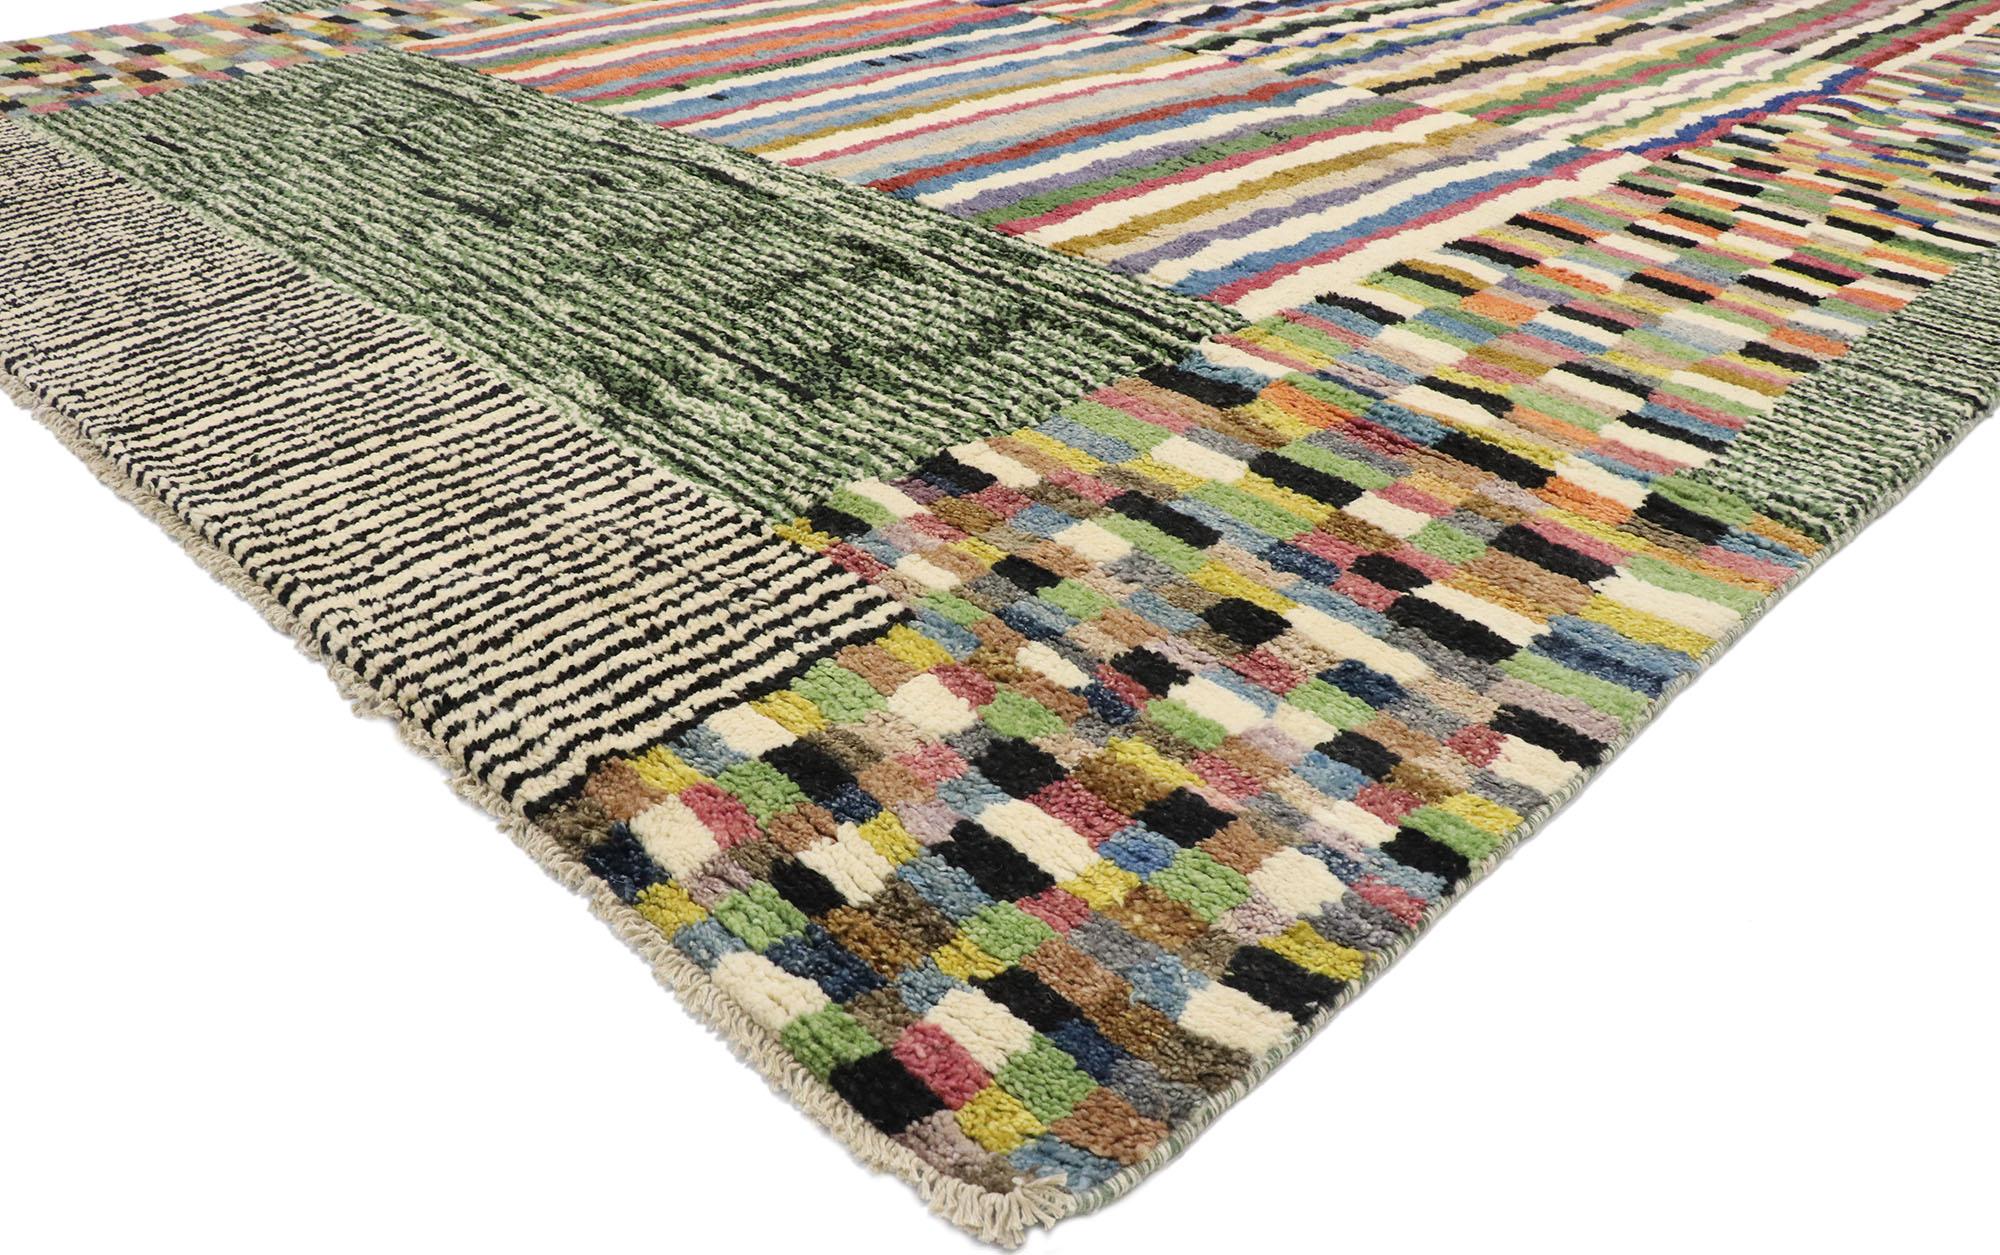 80650, new Contemporary Moroccan Area rug with Postmodern style Inspired by Ettore Sottsass. Drawing inspiration from the Berber Tribes of Morocco and their ancient symbolism combined with Ettore Sottsass, Michael Graves and Paul Klee, this hand